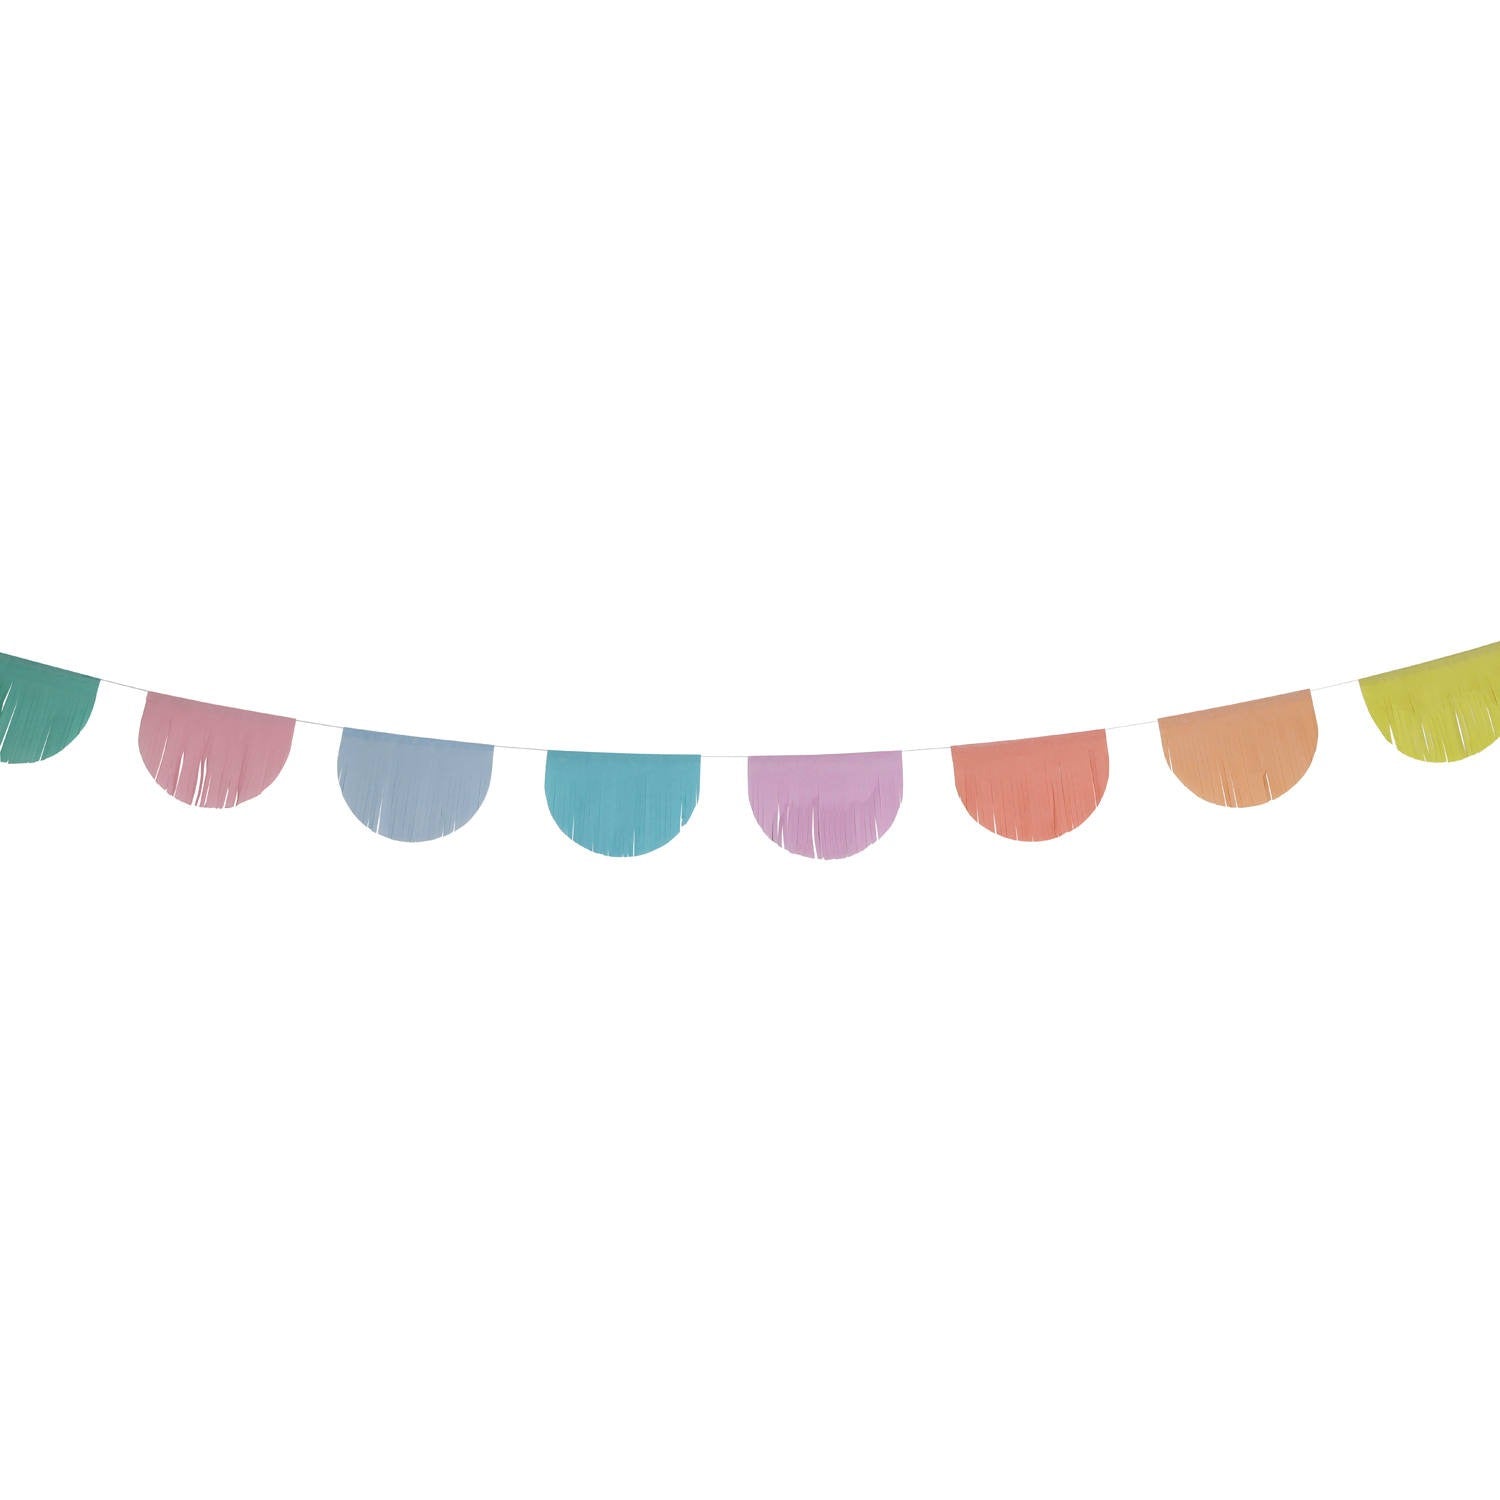 Garland in pastel colors 6m